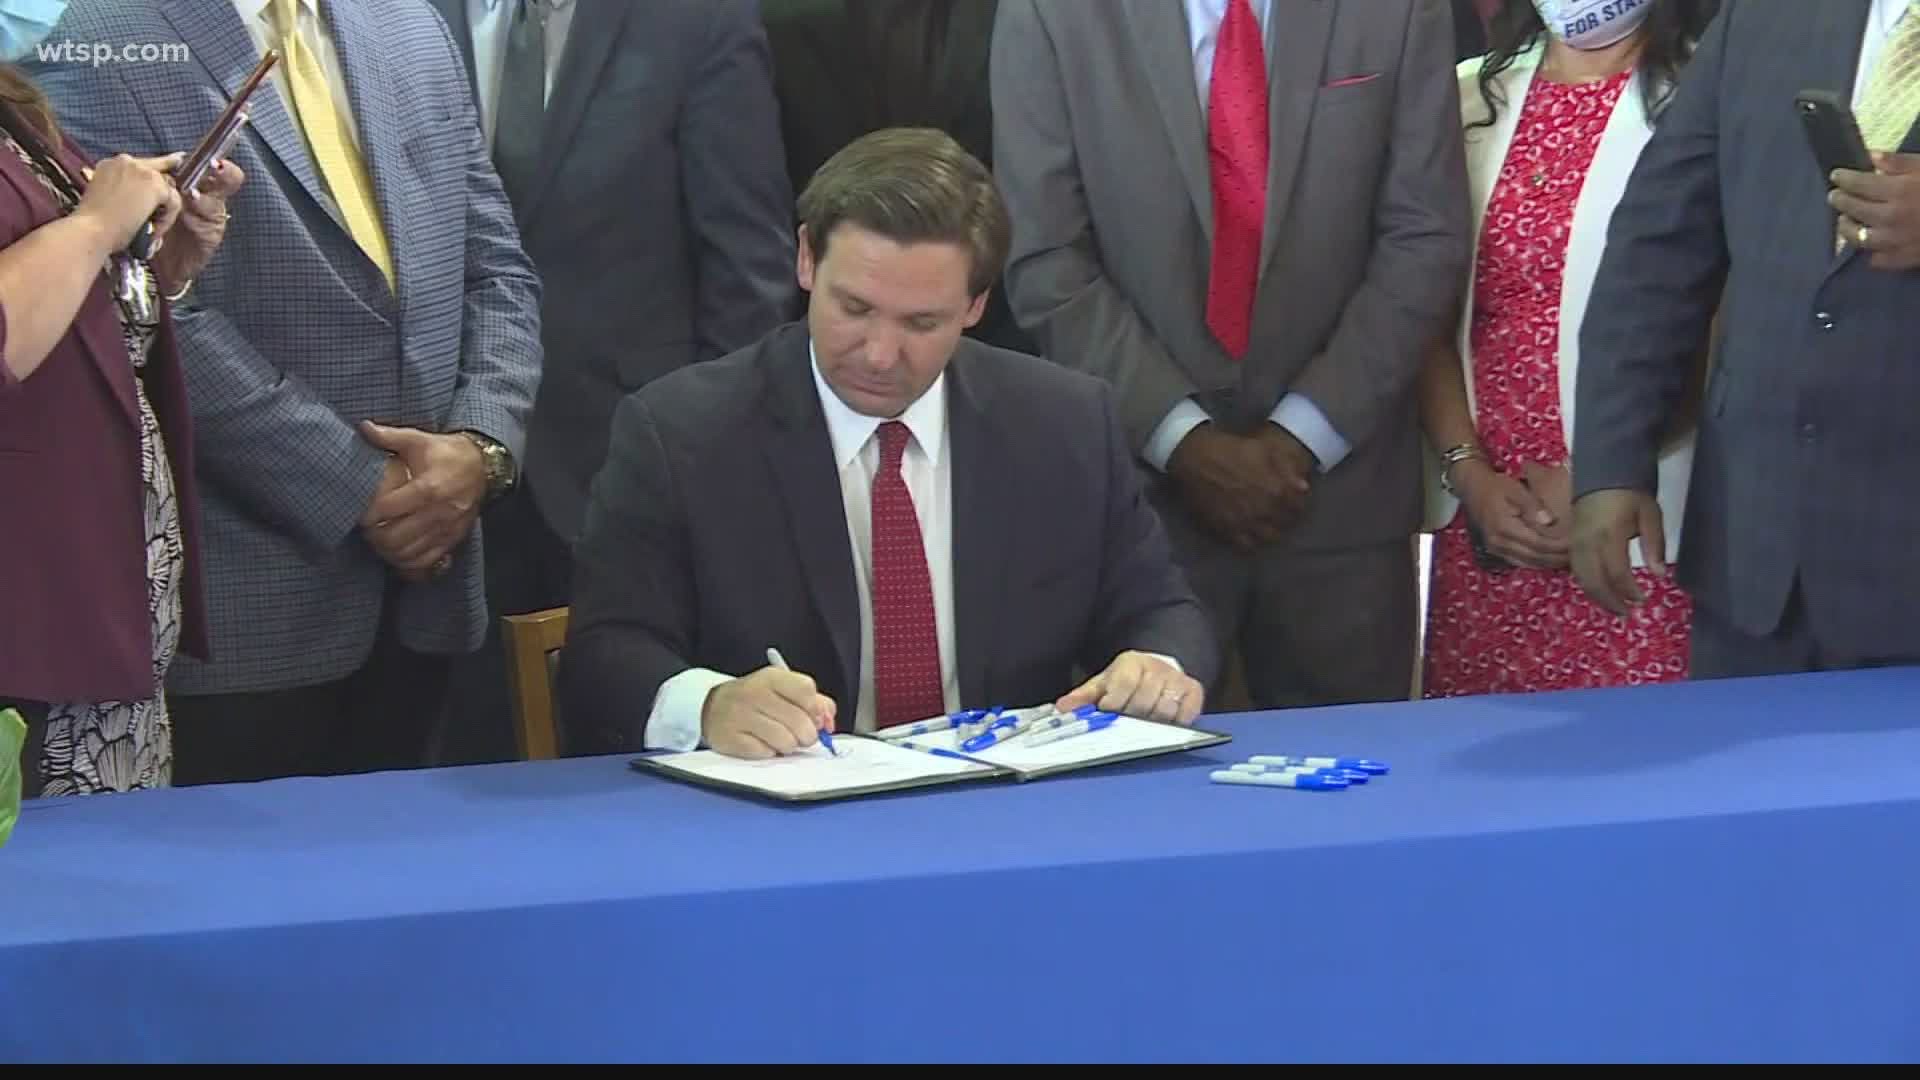 After signing a bill that expands a private school scholarship program, DeSantis took questions about the state's coronavirus response.